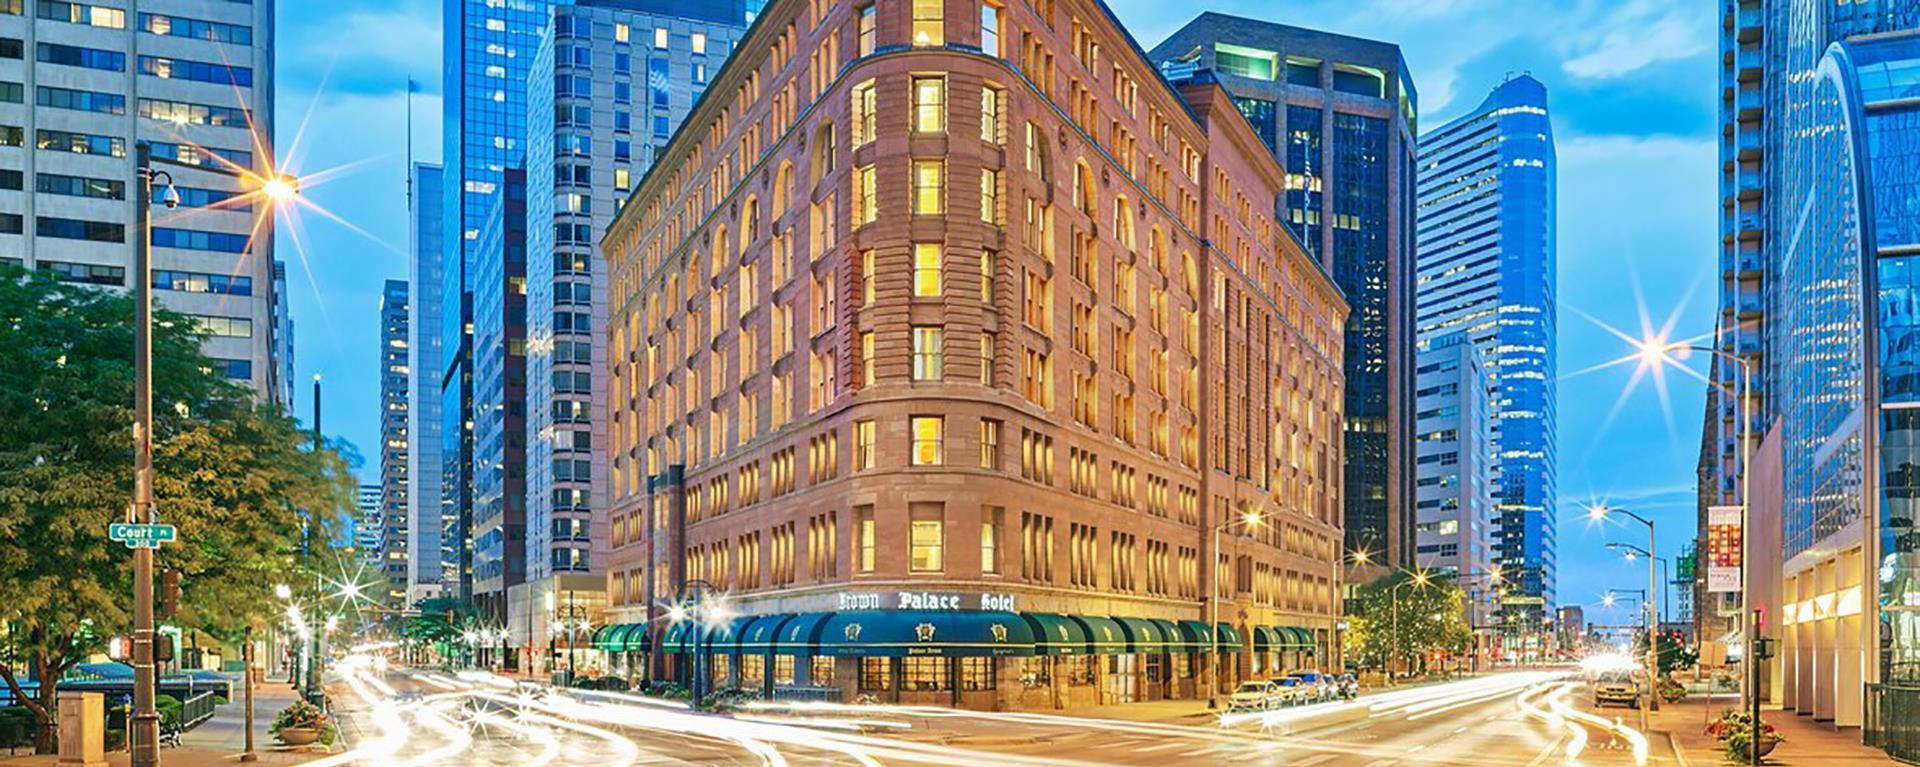 The Brown Palace Hotel and Spa, Autograph Collection in Denver, CO